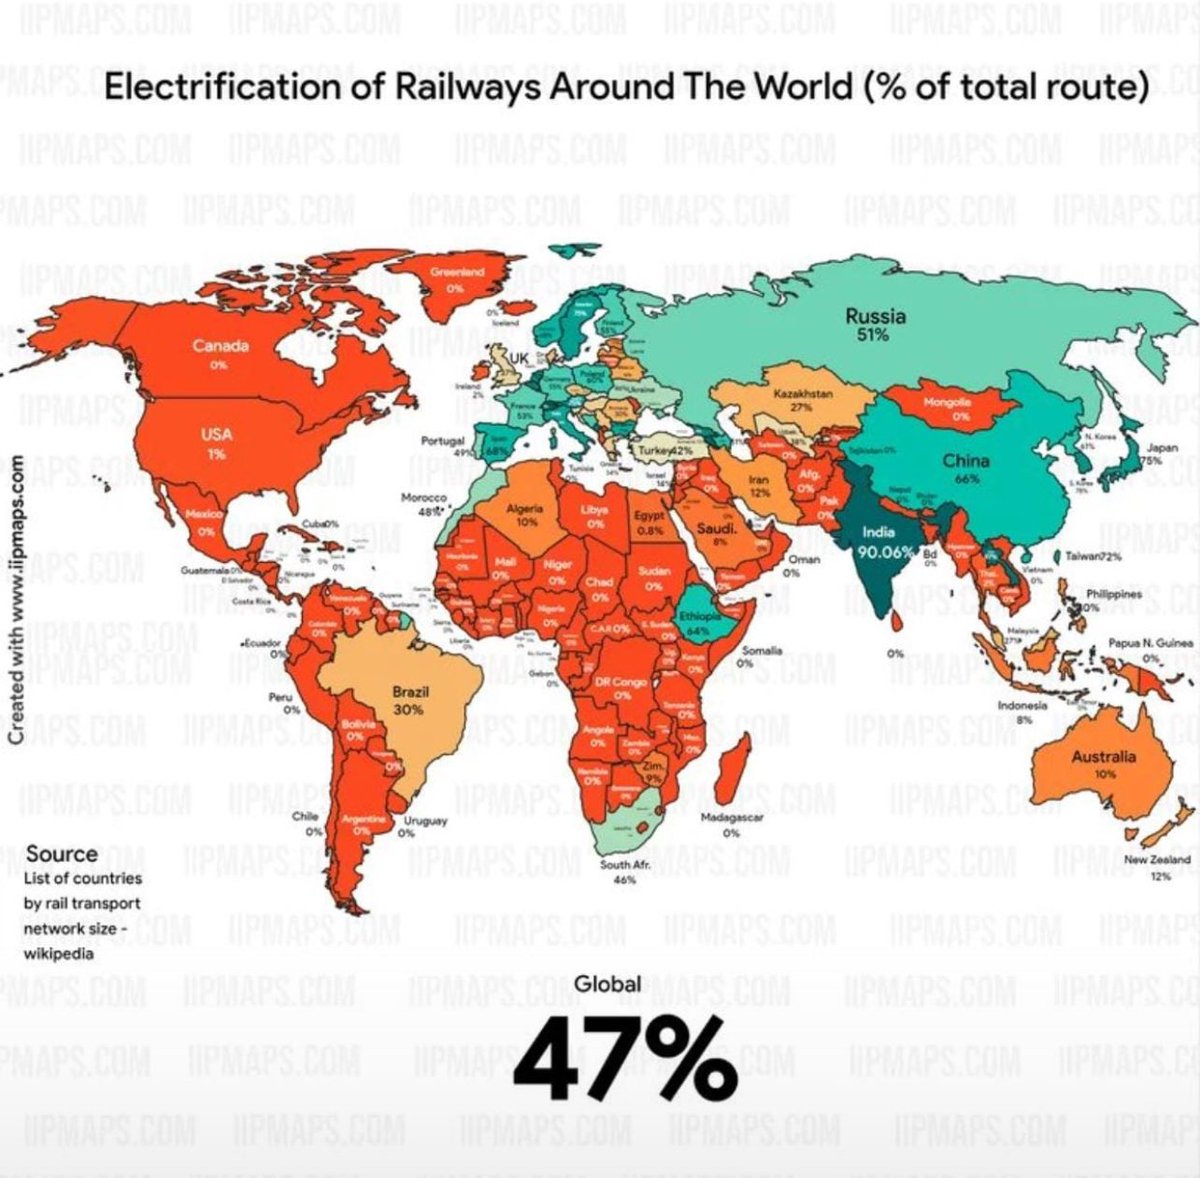 About 70% of our #railway electrification was done post 2014. #india is now more than 90% electrified for its railway. A big kudos to our #PMModiji and #railwayminister to make this possible. 

#ModiyudeGuarantee #BJP4India